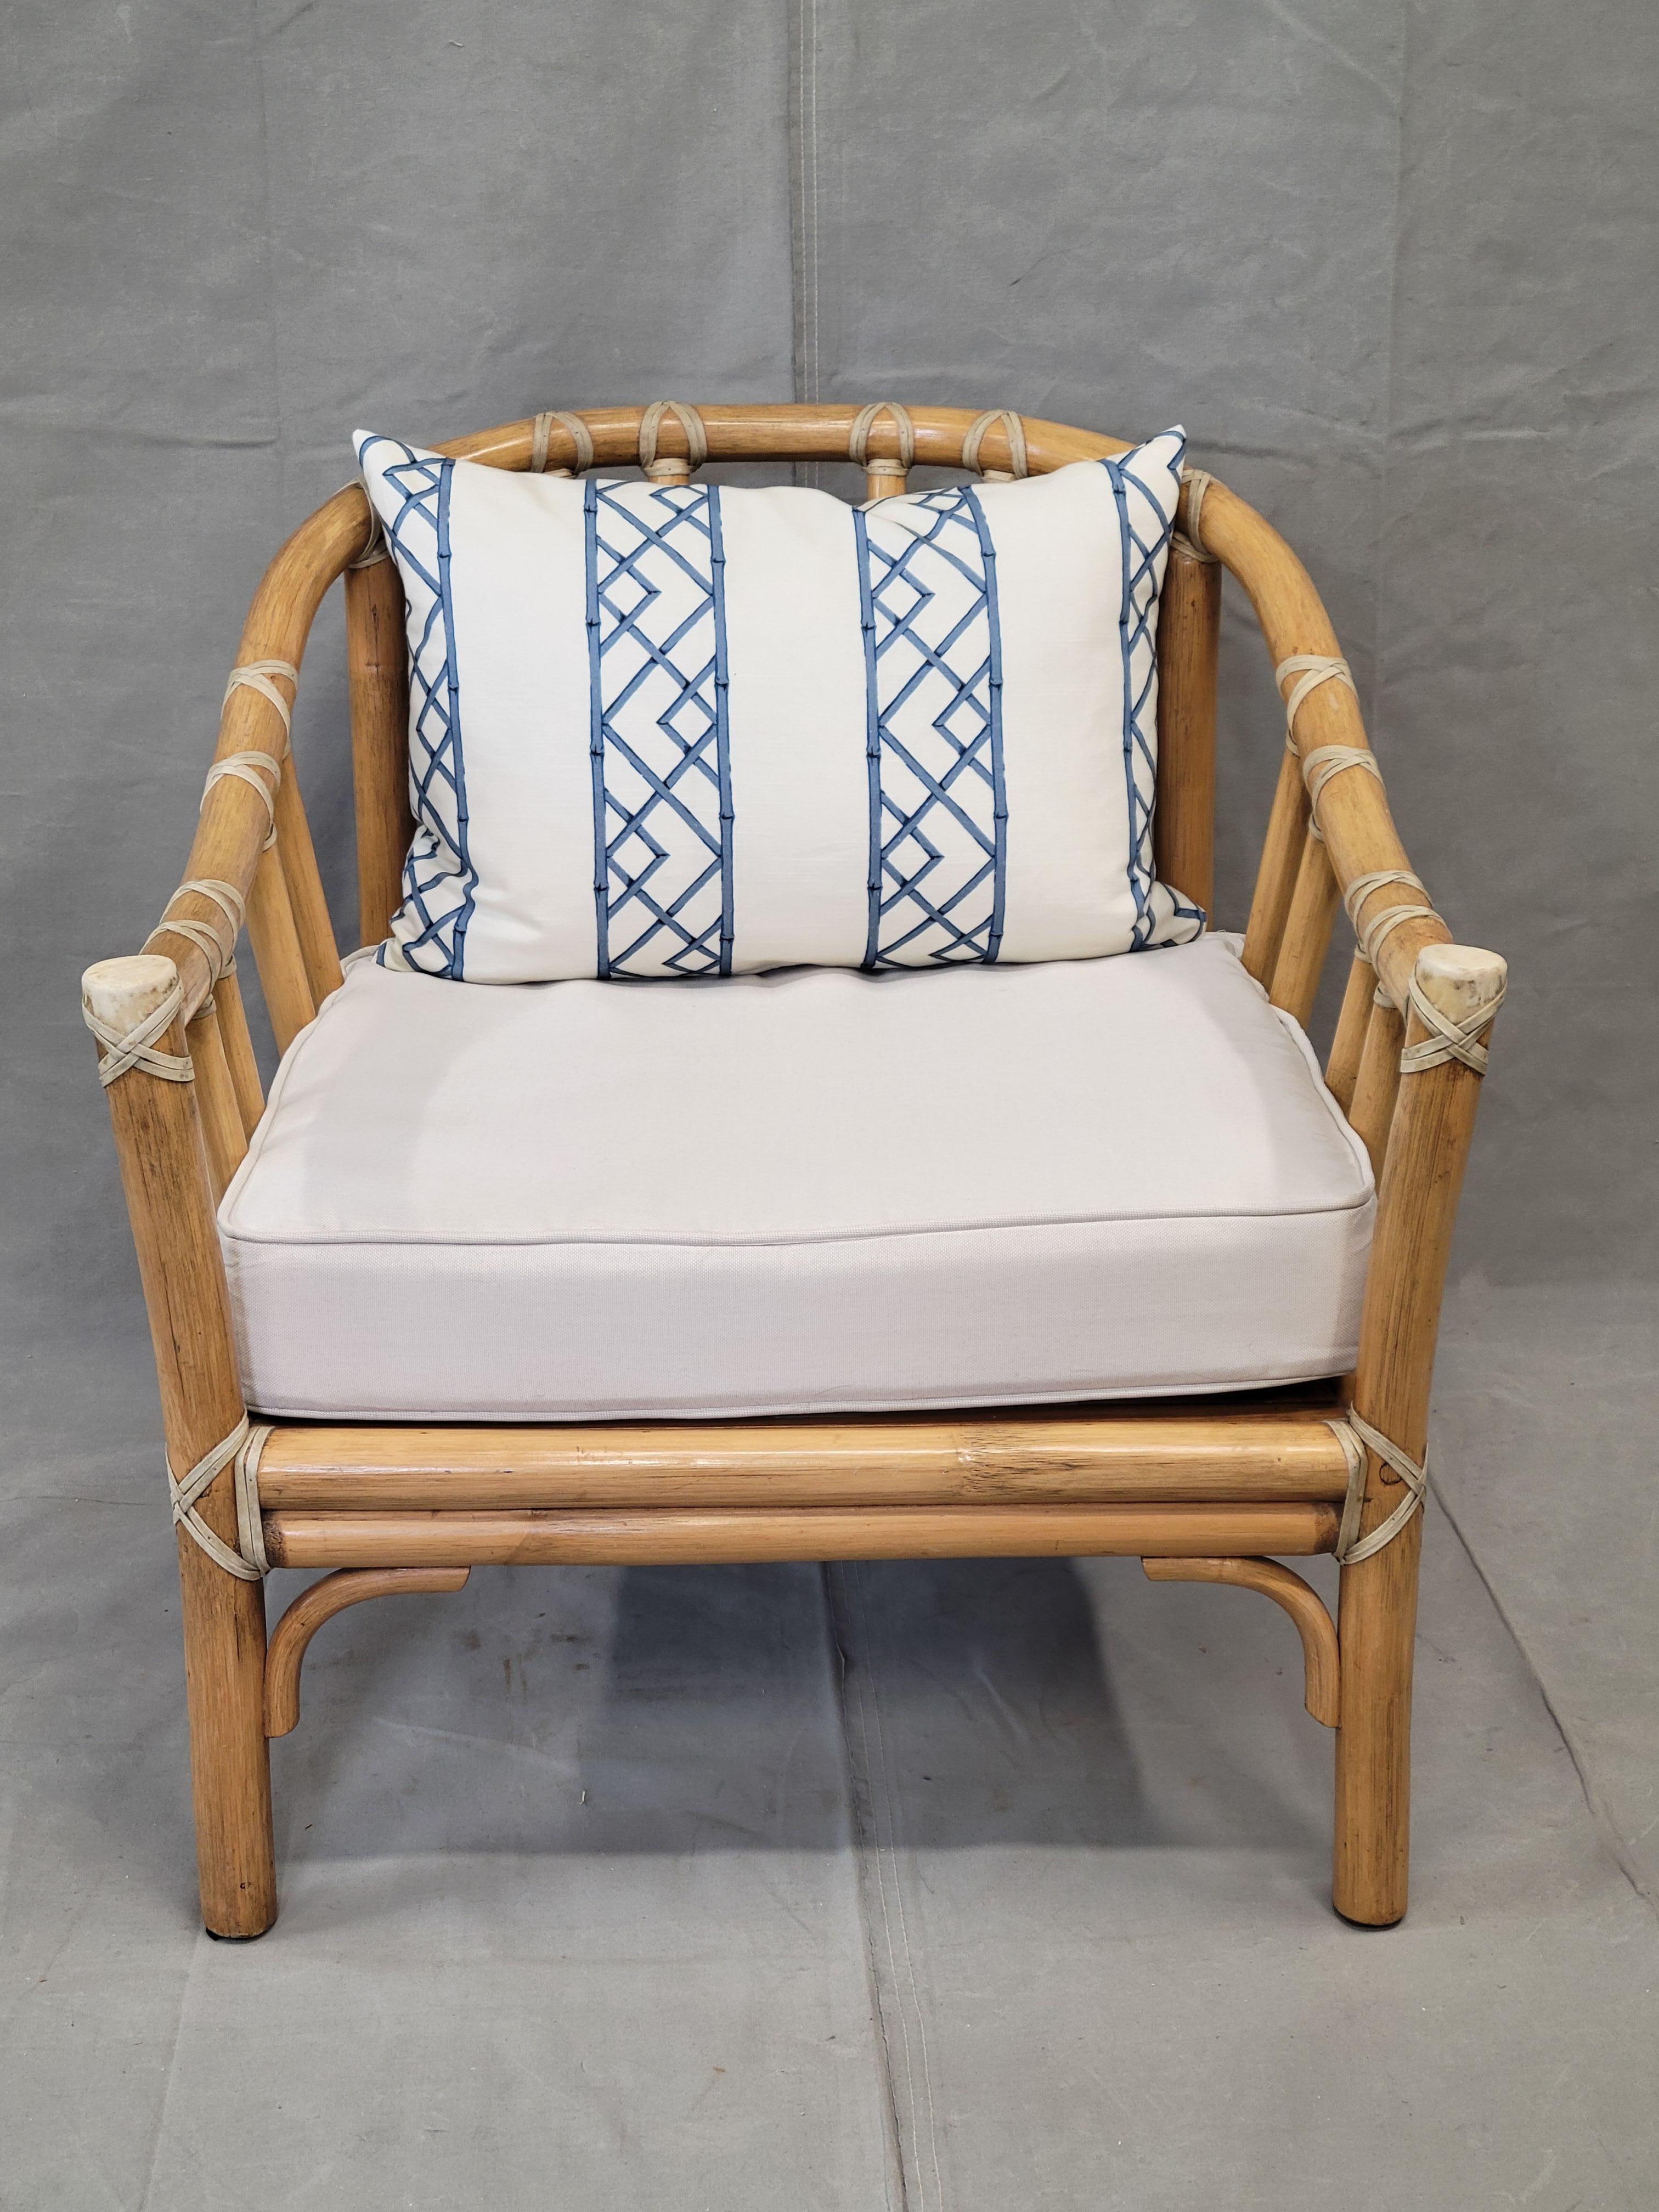 Vintage 1978 McGuire Bamboo Lounge Chairs With Two Sets of Cushions - a Pair In Good Condition For Sale In Centennial, CO